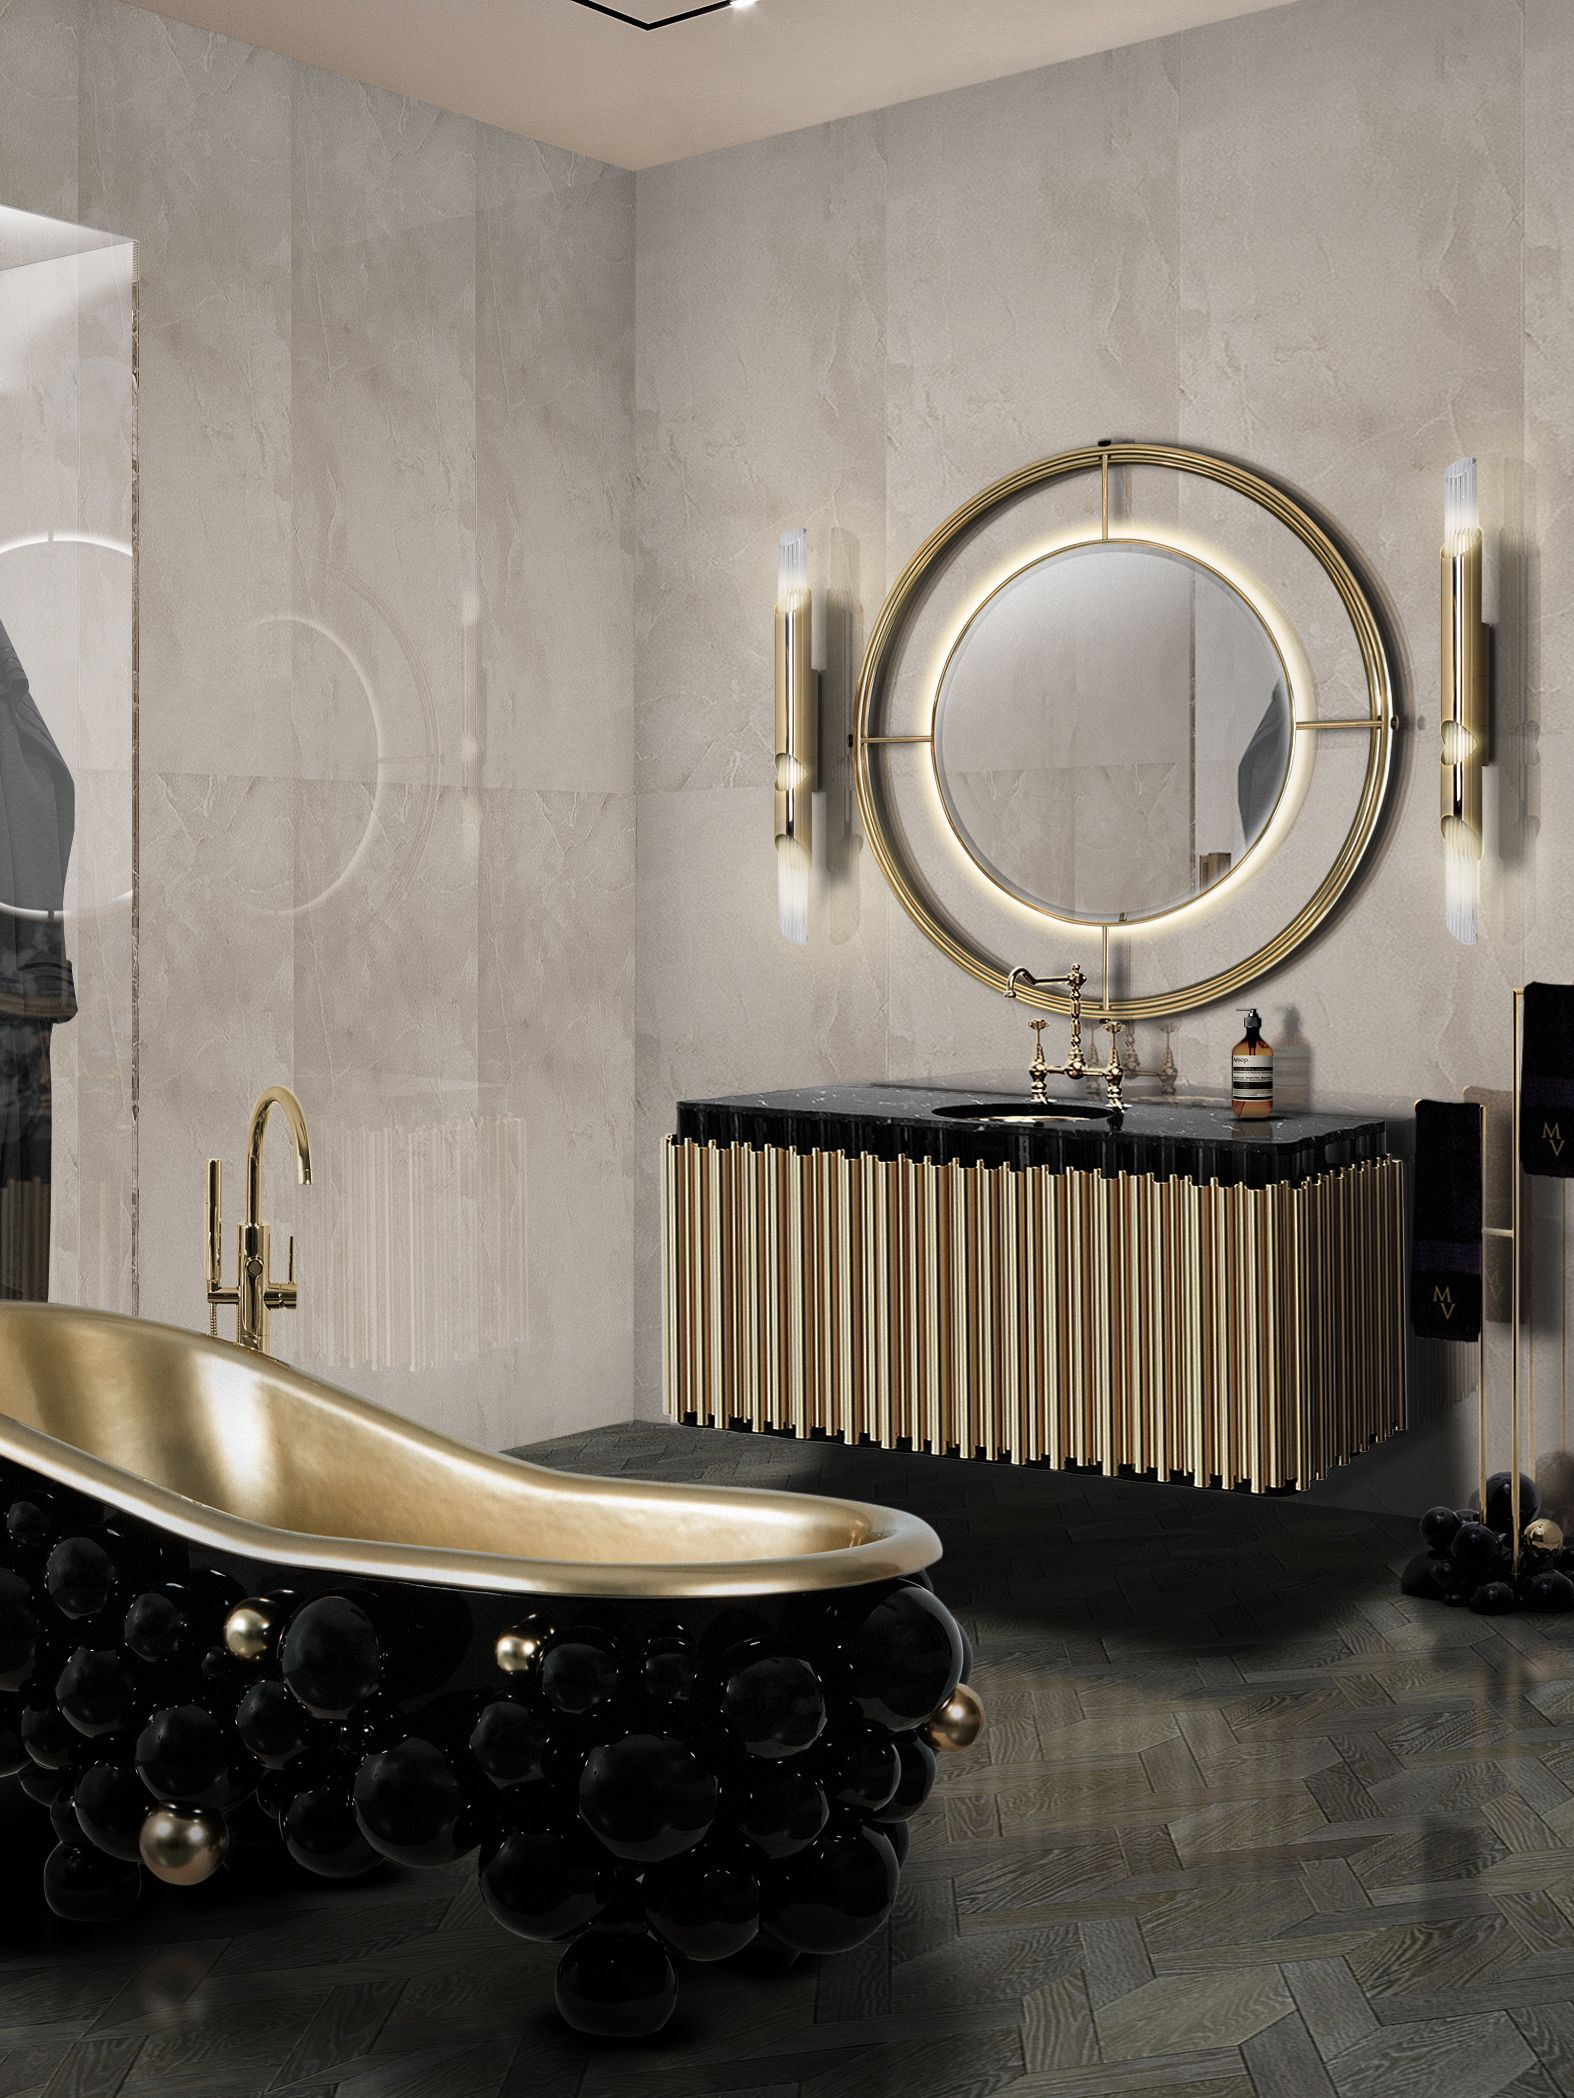 Bathroom Design That Exudes Glamour And Sophistication - Home'Society